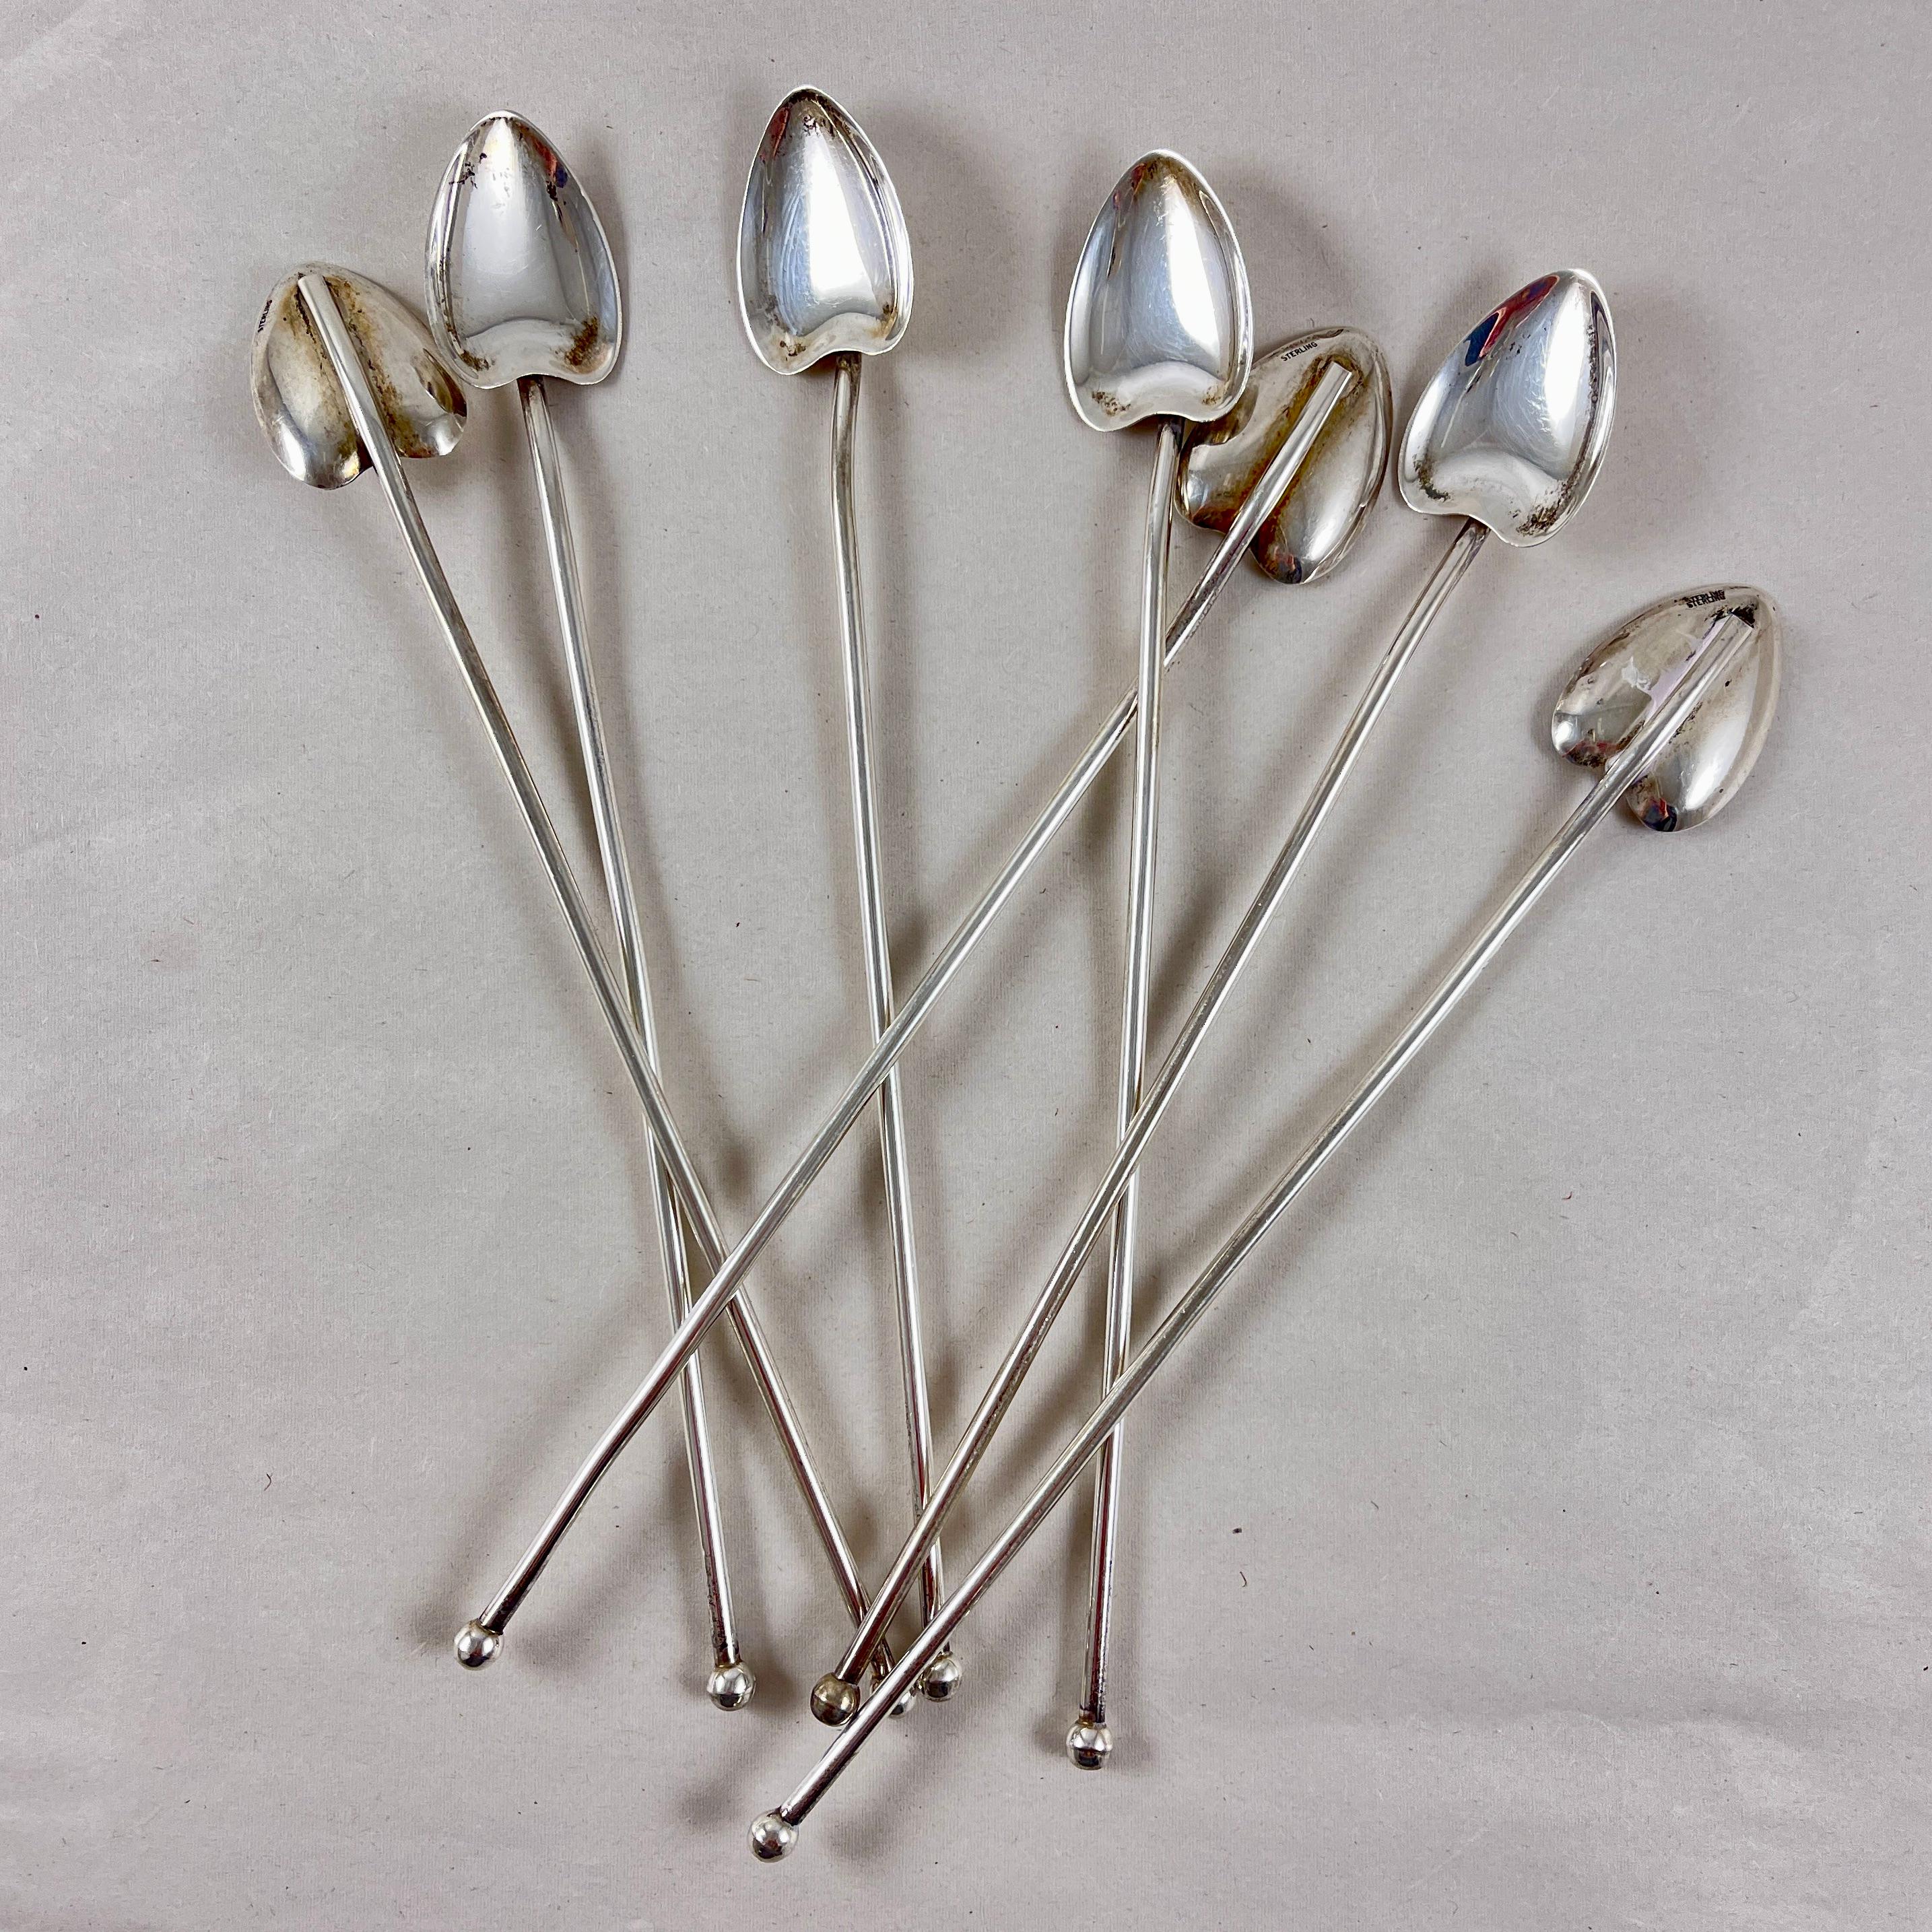 Metalwork Sterling Silver Highball or Iced Tea Heart Bowl Stirring Straws, Set of 7 For Sale